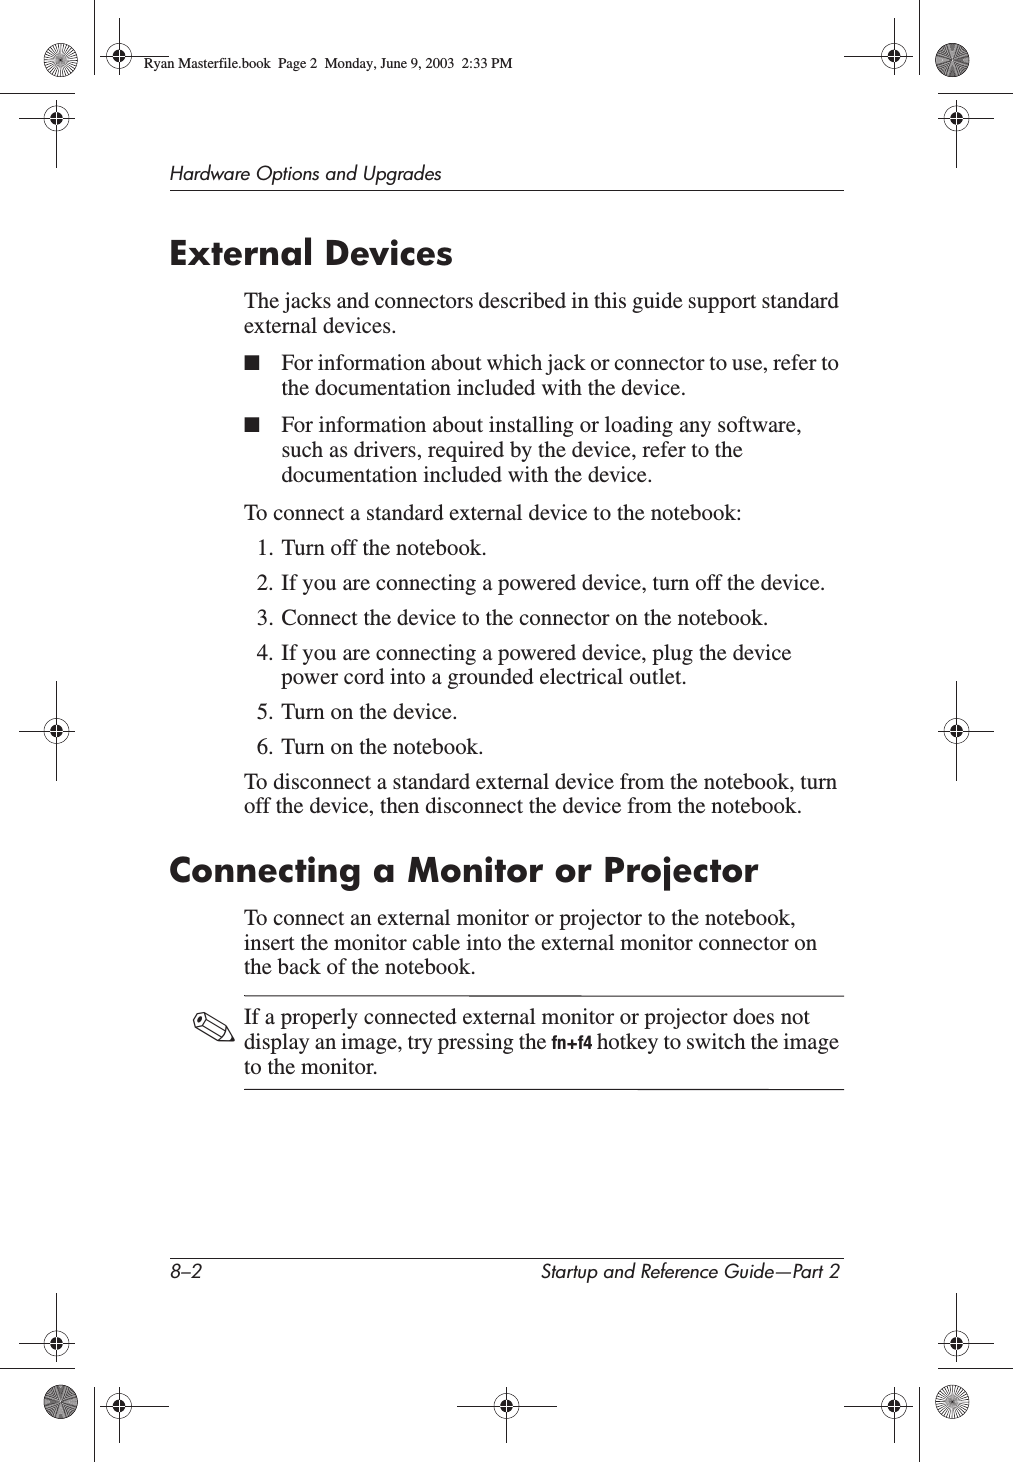 8–2 Startup and Reference Guide—Part 2Hardware Options and UpgradesExternal DevicesThe jacks and connectors described in this guide support standard external devices.■For information about which jack or connector to use, refer to the documentation included with the device.■For information about installing or loading any software, such as drivers, required by the device, refer to the documentation included with the device.To connect a standard external device to the notebook:1. Turn off the notebook.2. If you are connecting a powered device, turn off the device.3. Connect the device to the connector on the notebook.4. If you are connecting a powered device, plug the device power cord into a grounded electrical outlet.5. Turn on the device.6. Turn on the notebook.To disconnect a standard external device from the notebook, turn off the device, then disconnect the device from the notebook.Connecting a Monitor or ProjectorTo connect an external monitor or projector to the notebook, insert the monitor cable into the external monitor connector on the back of the notebook.✎If a properly connected external monitor or projector does not display an image, try pressing the fn+f4 hotkey to switch the image to the monitor.Ryan Masterfile.book  Page 2  Monday, June 9, 2003  2:33 PM